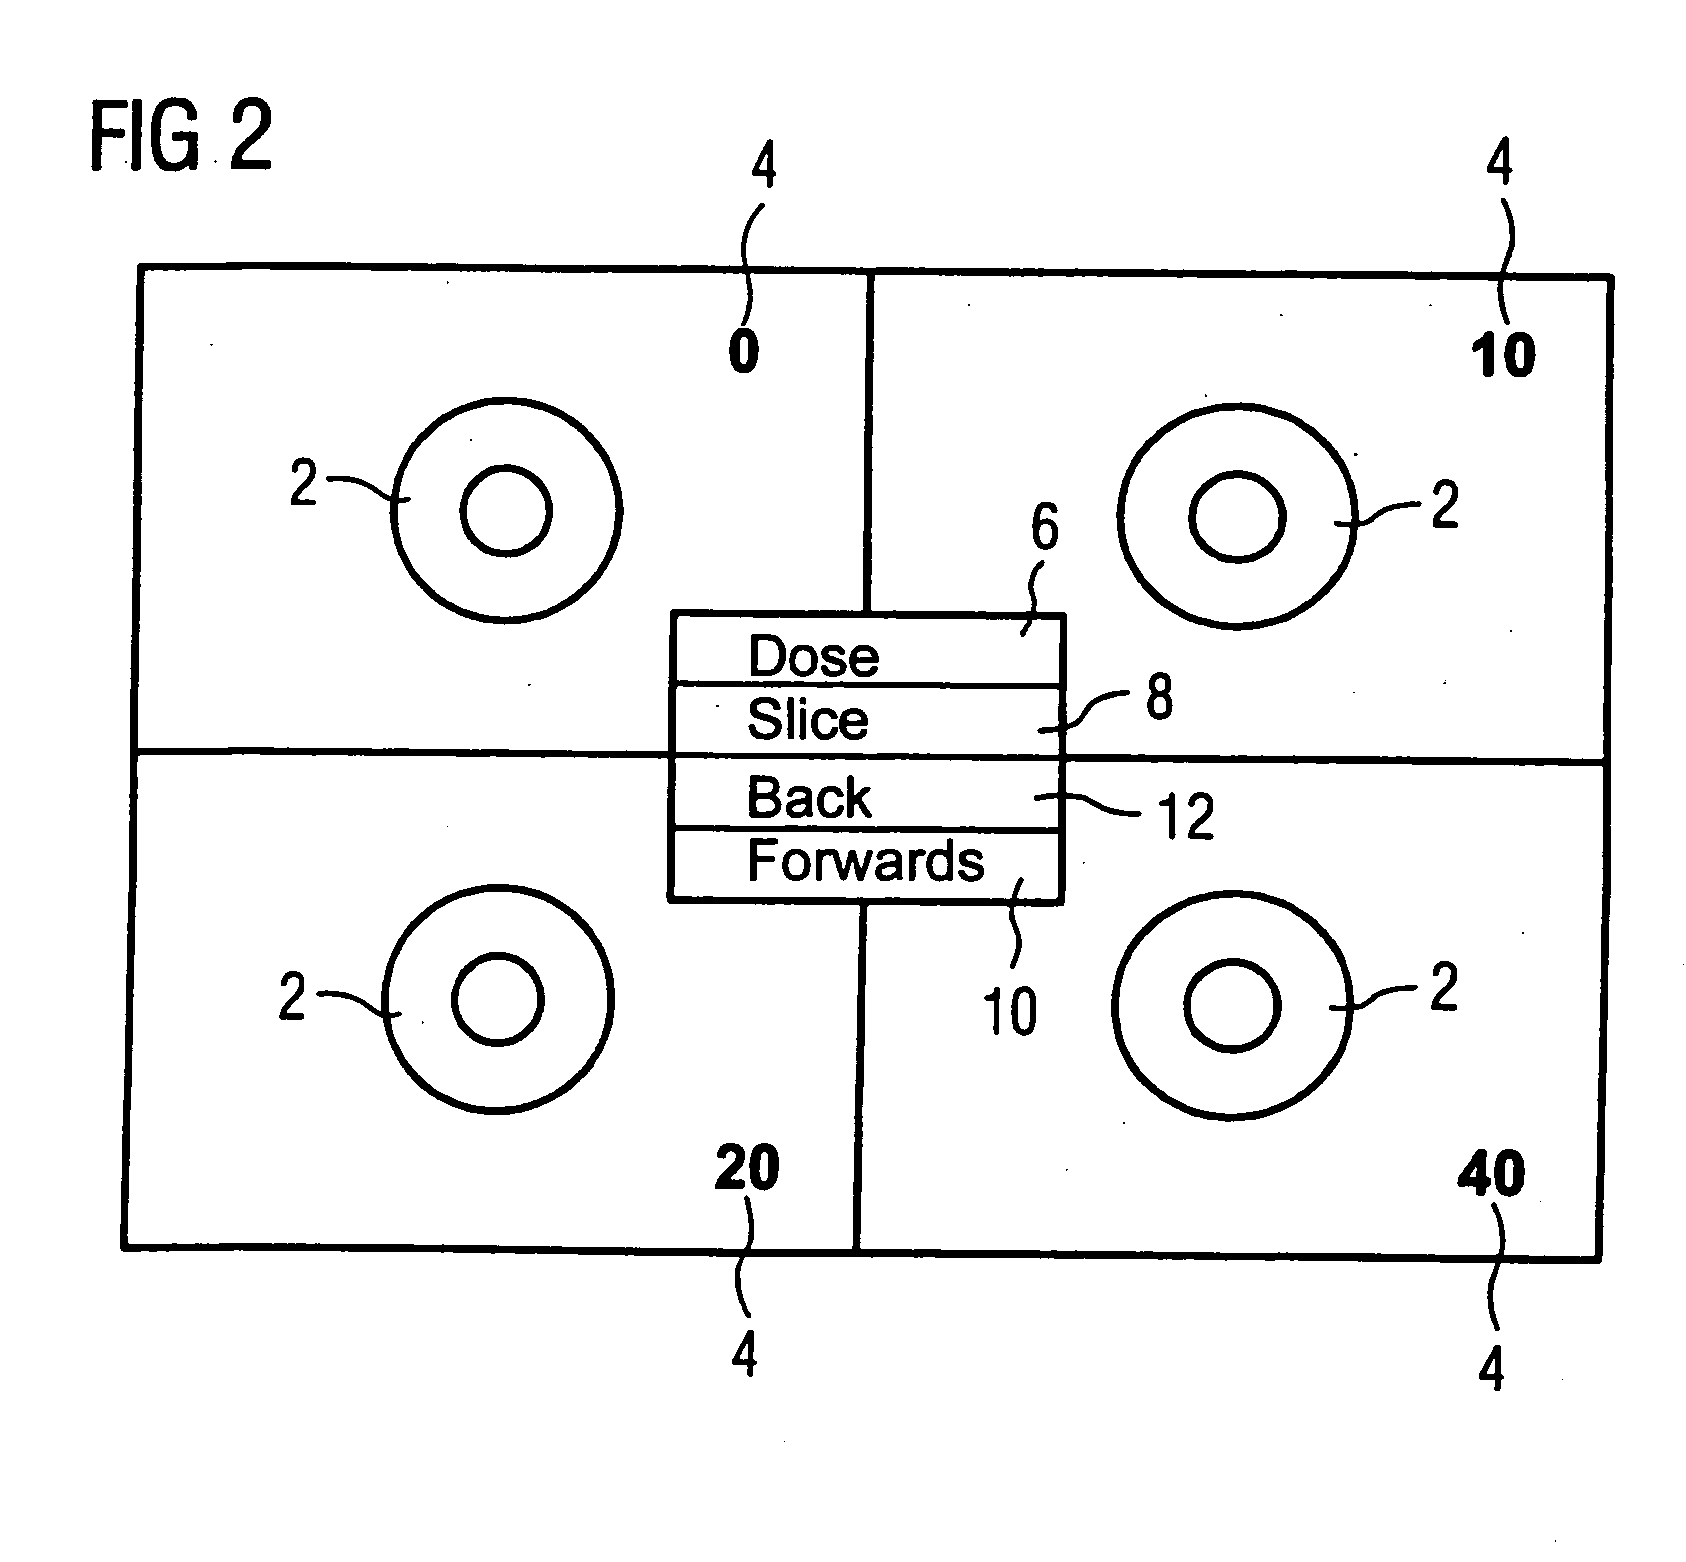 Method for automatic sorting and representation of medical data sets